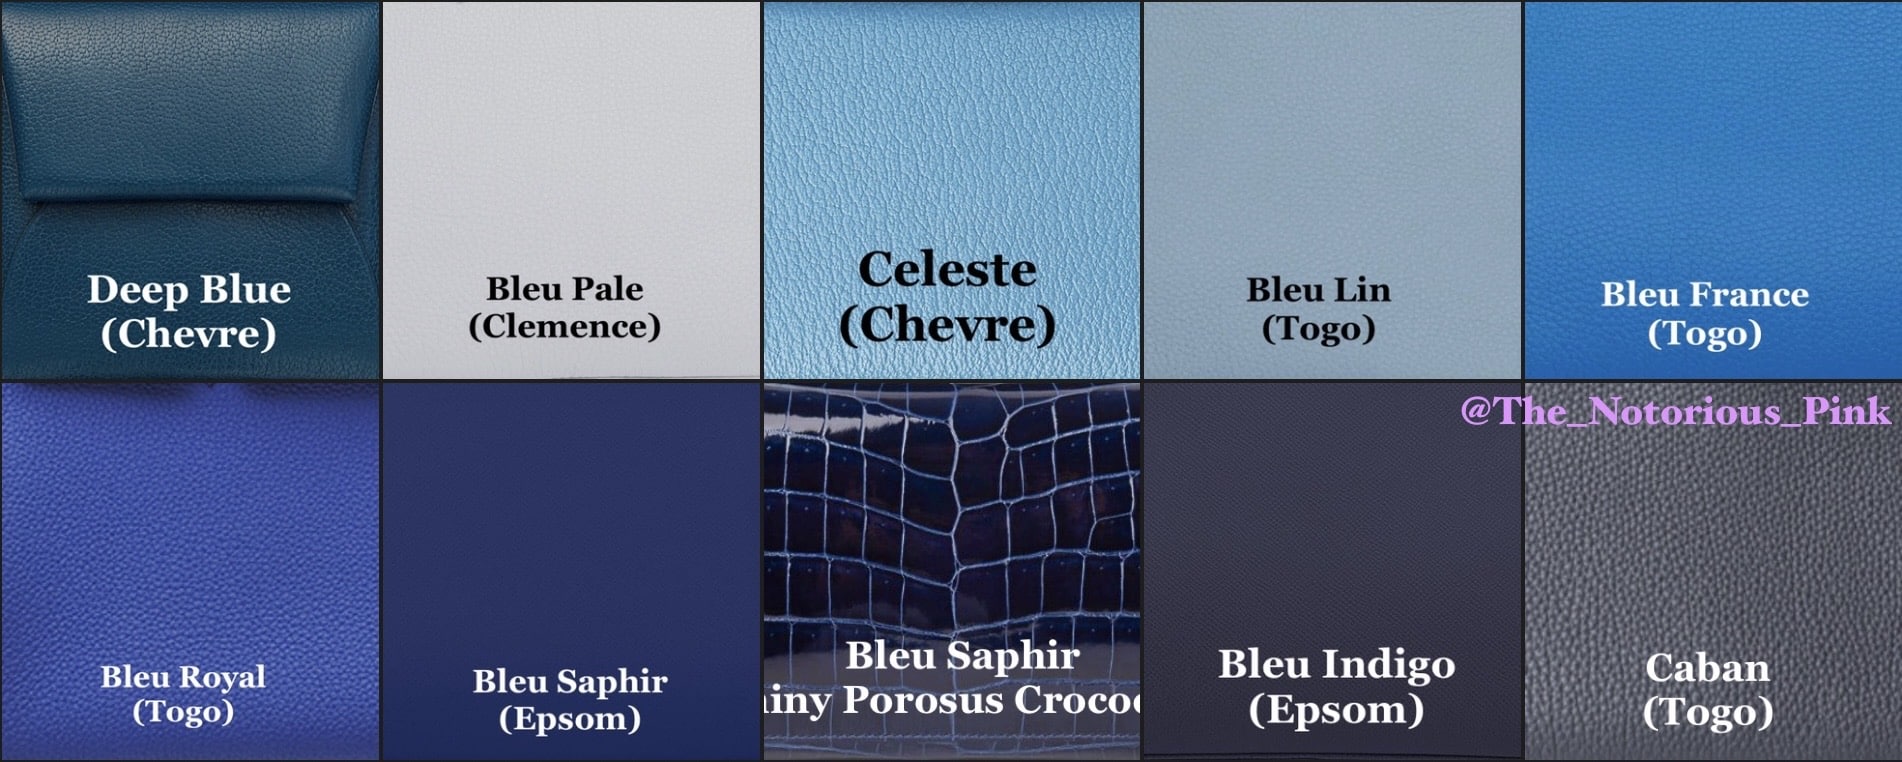 The Blue range of leather colors being offered by Hermès for Autumn-Winter 2022. Via @The_Notorious_Pink.